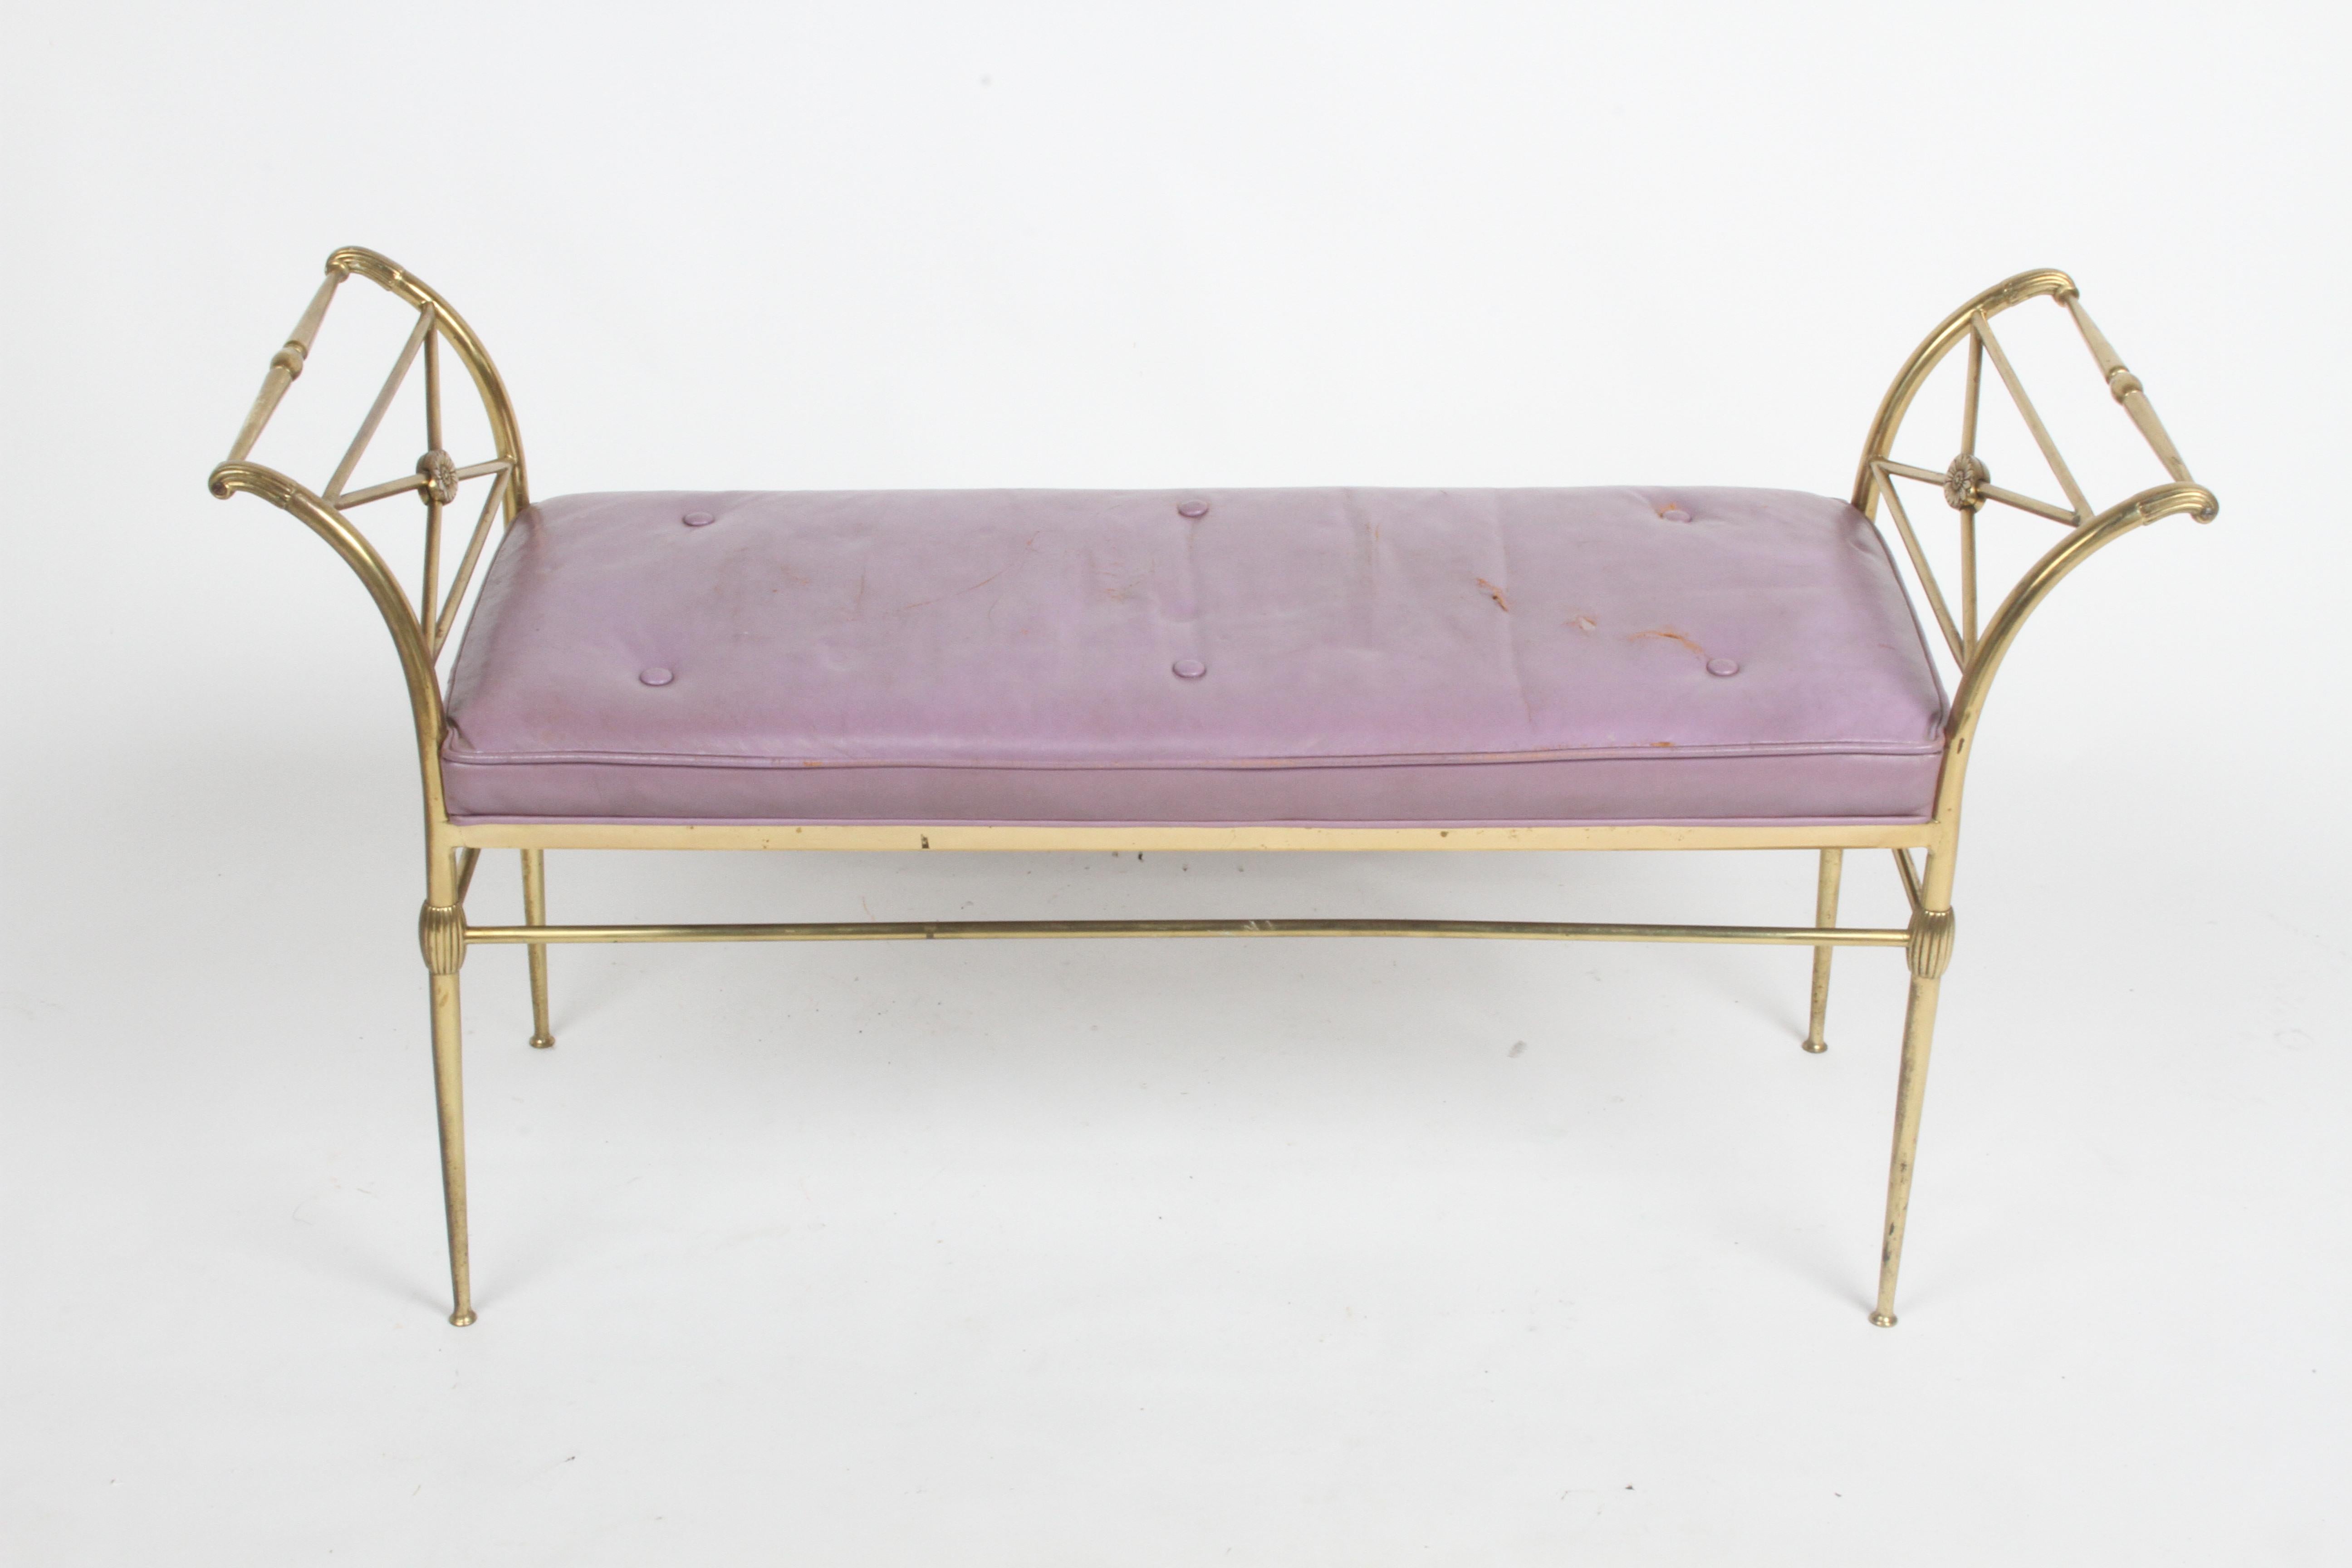 Vintage Hollywood Regency Italian brass bench with a neoclassical flair with original purple leather seat cushion. Brass frame arms have X form supports with oval decoration, lower cross supports with fluted detail. Brass shows patina, leathers